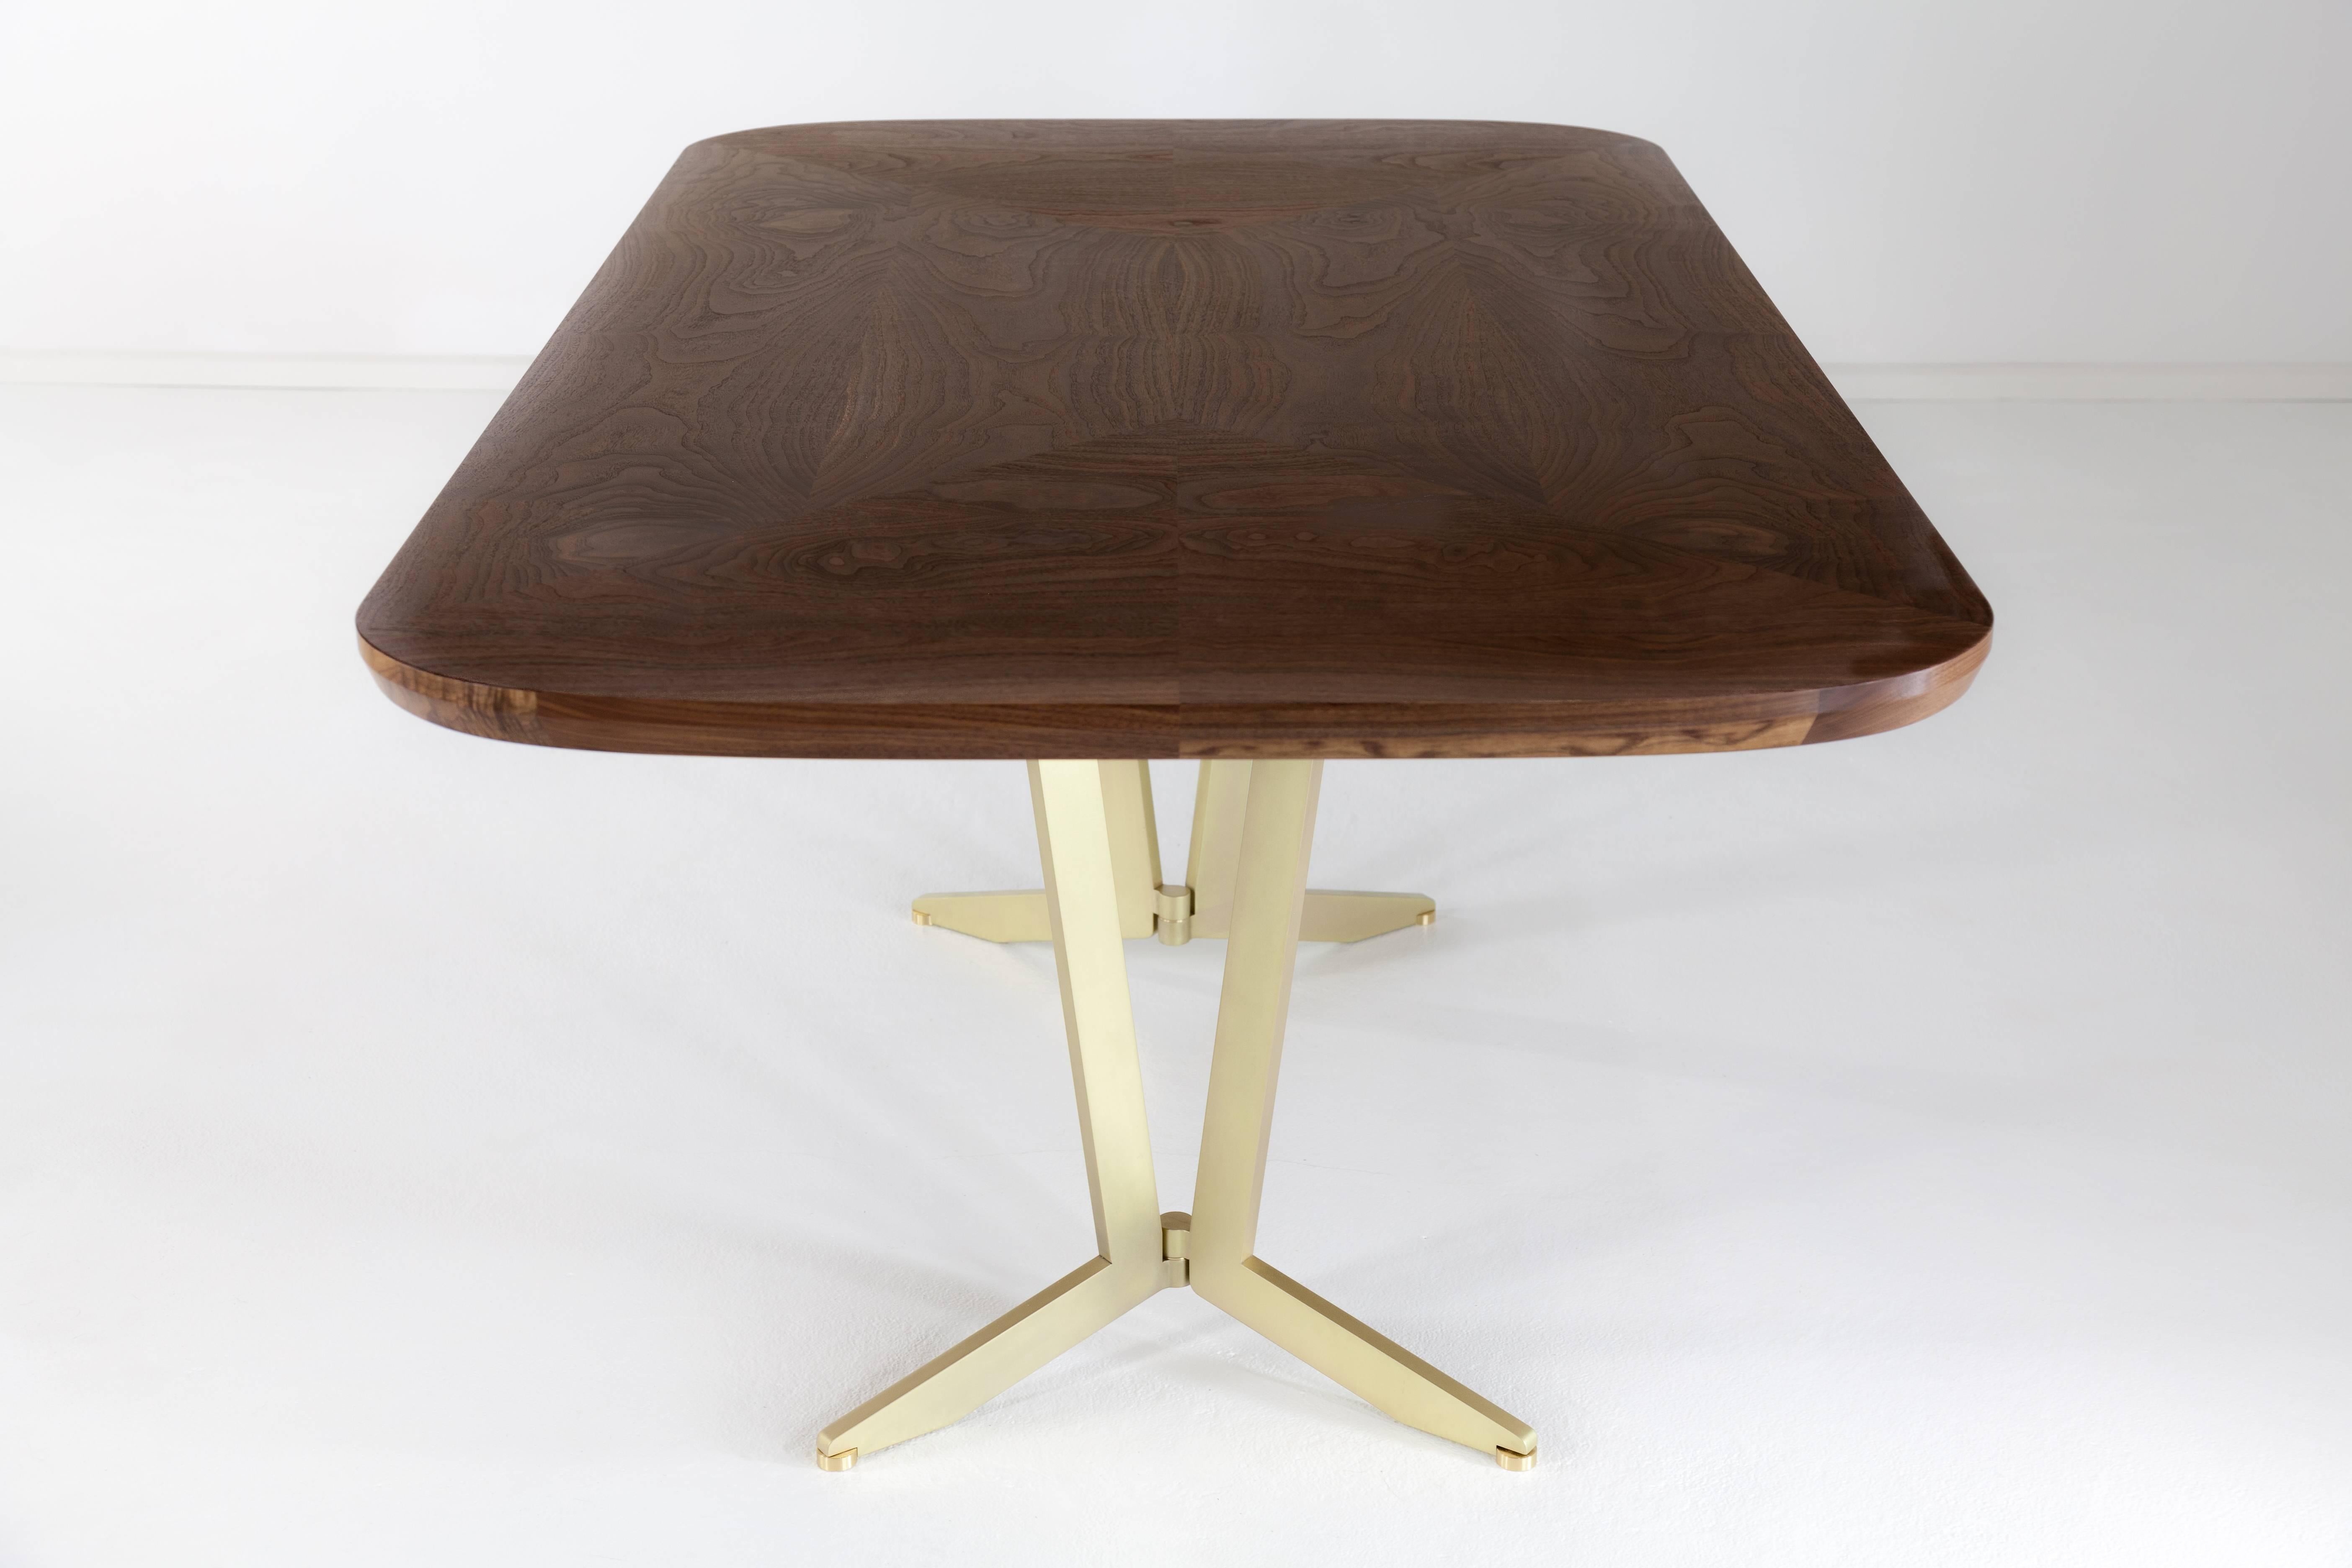 Barnet Dining Table, American Hardwood and Steel In New Condition For Sale In Brooklyn, NY